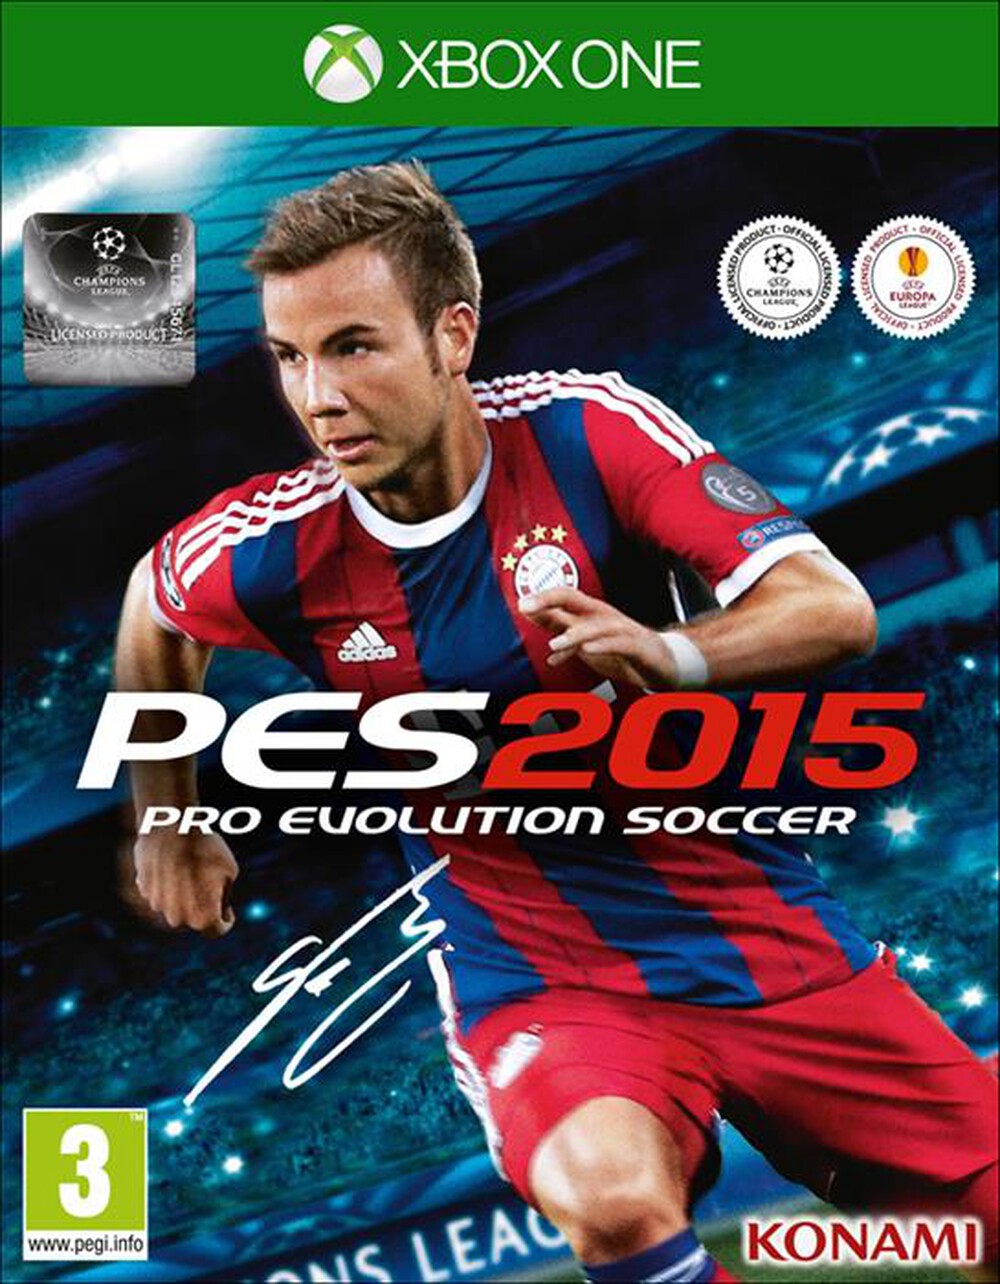 "HALIFAX - PES 2015 Day One Edition Xbox One"